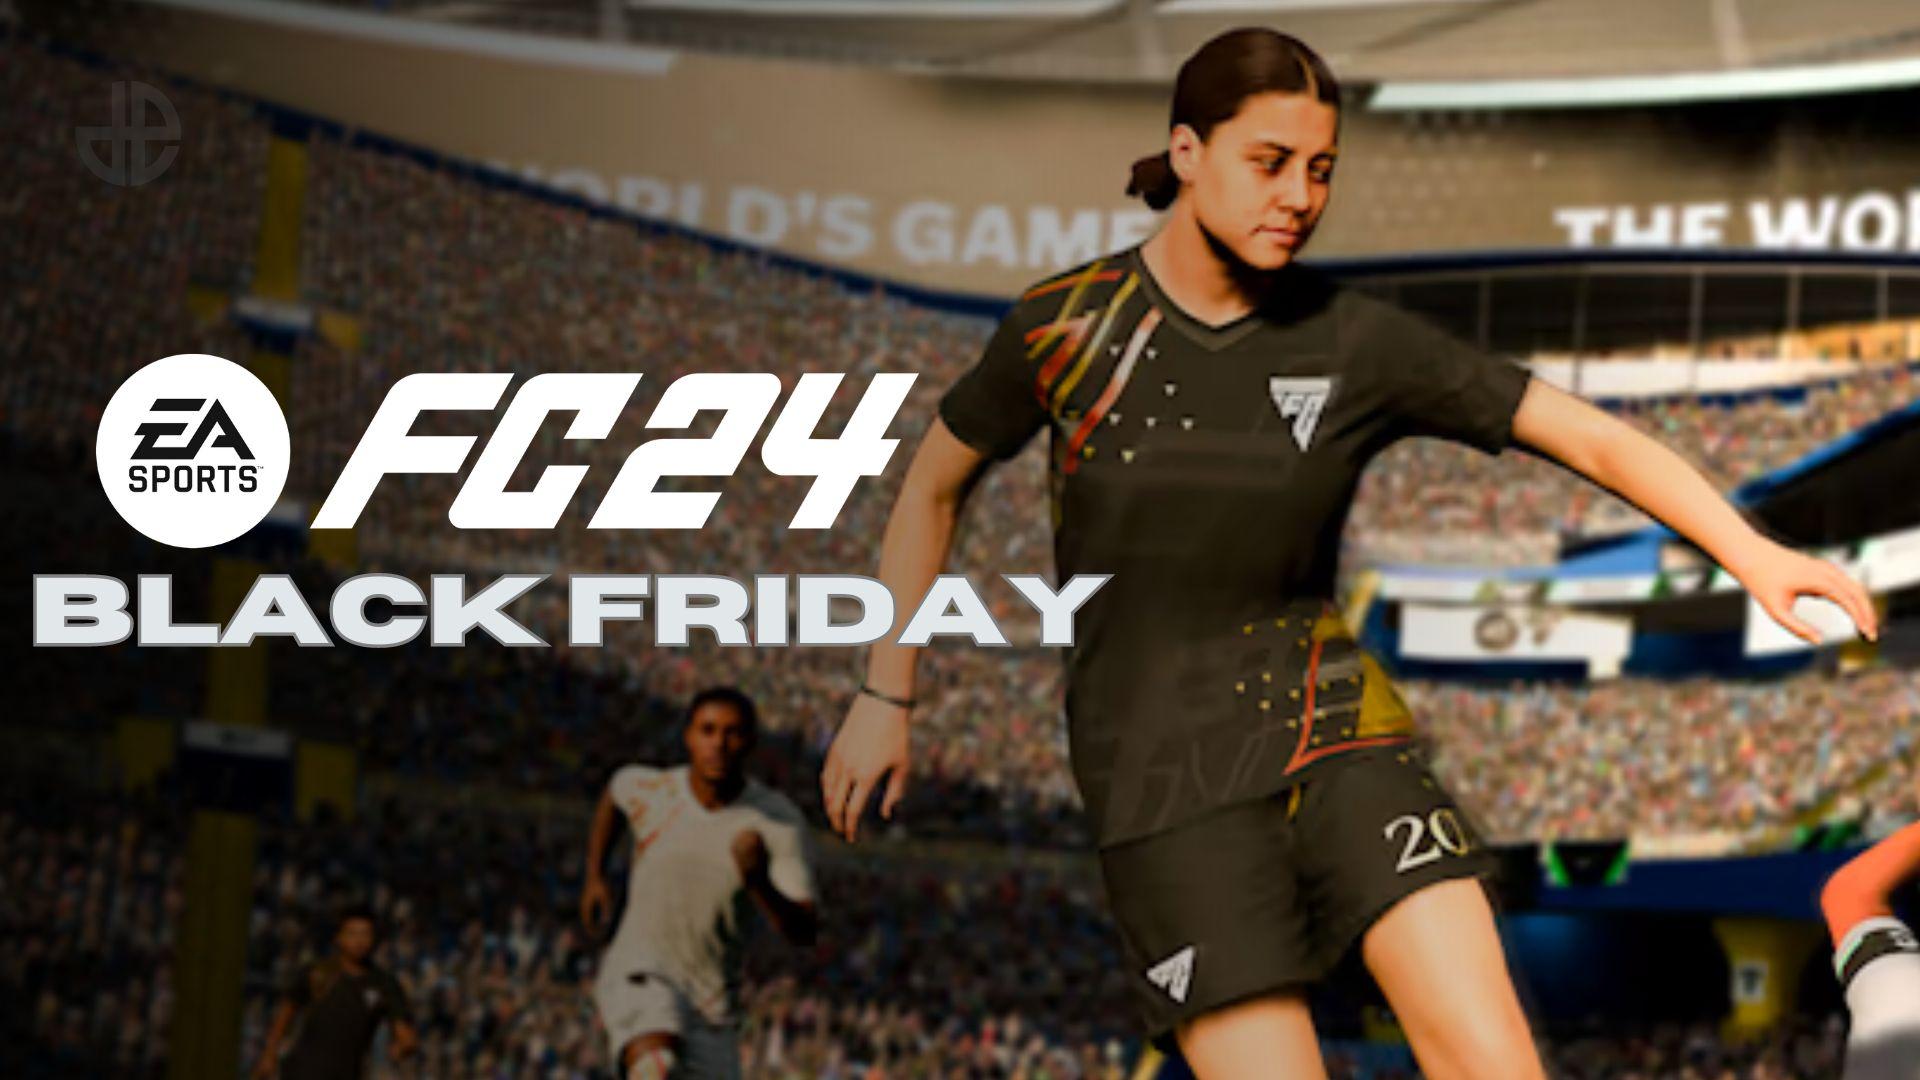 Sam Kerr in black jersey in EA FC 24 next to Black Friday text